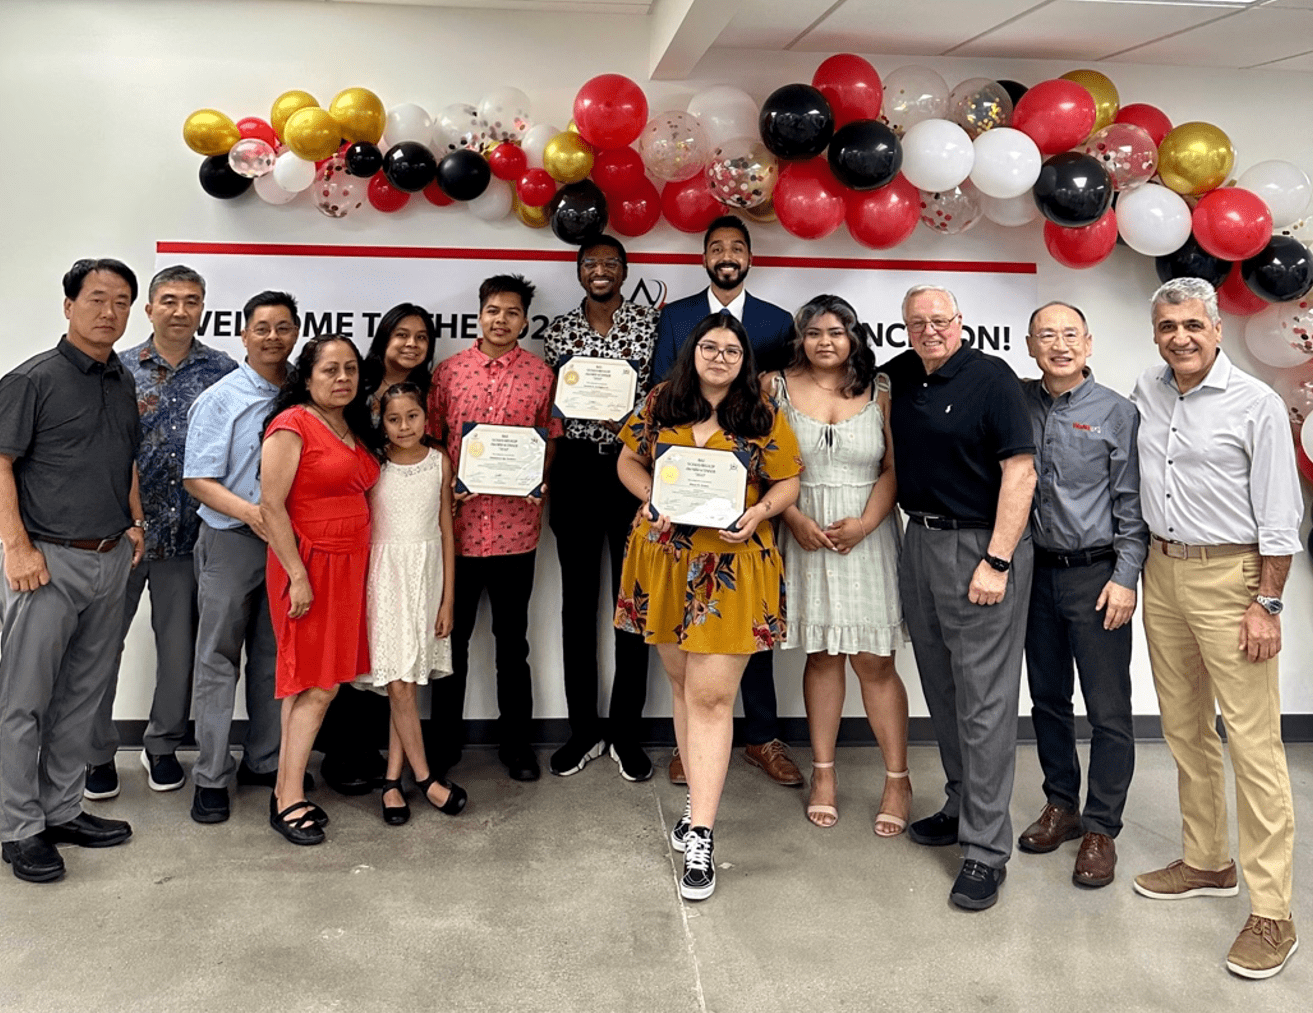 WABA GRILL AWARDS $22,000 IN EDUCATIONAL SCHOLARSHIPS  TO SUPPORT RESTAURANT EMPLOYEES AND FAMILIES